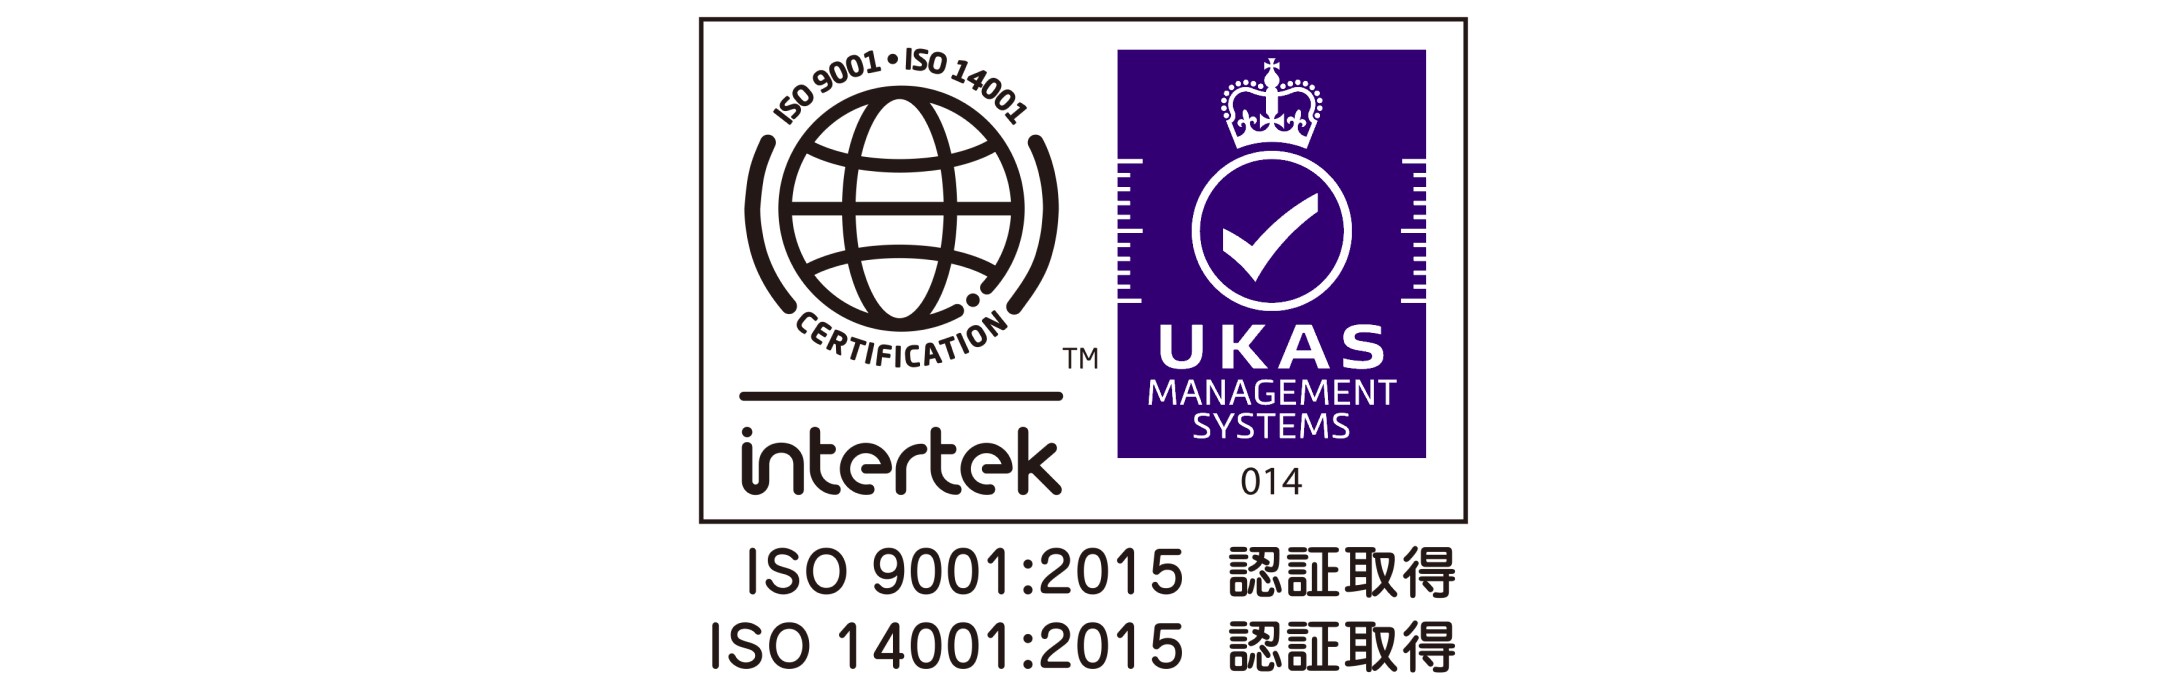 ISO 9001-14001 認証取得（20210927デザイン変更）